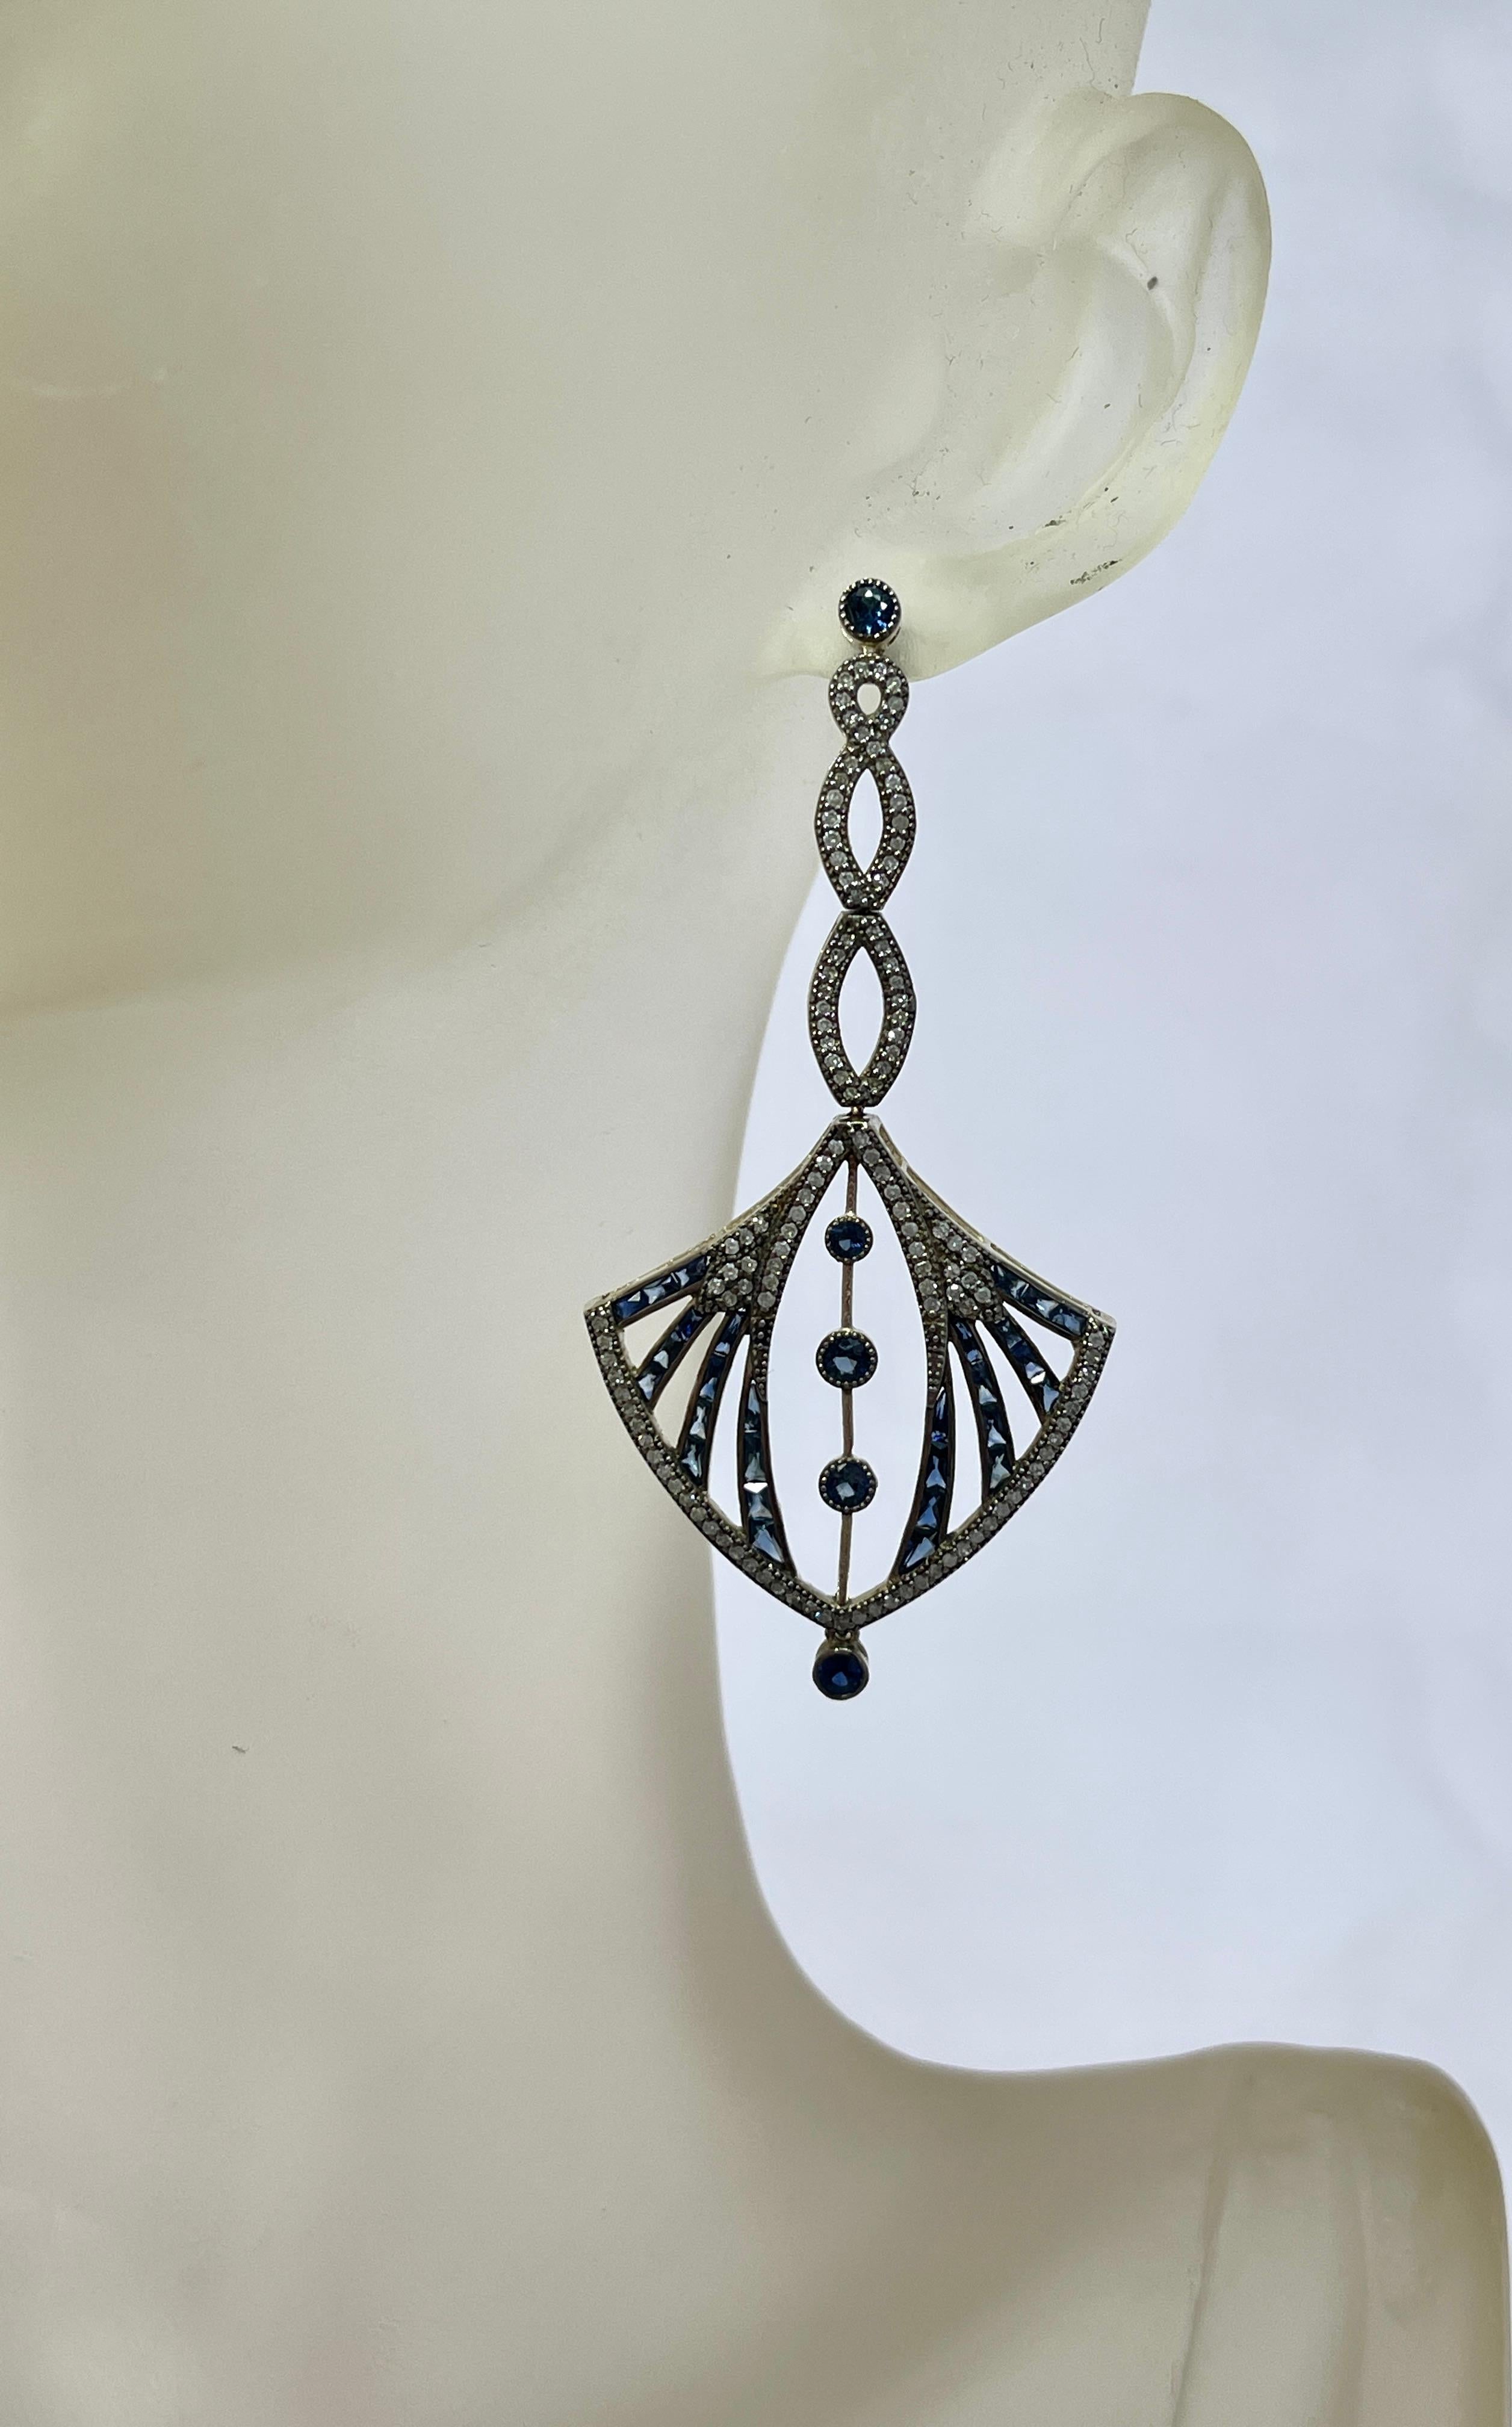 These earrings are fit for ‘Your Inner Flapper’!!
They feature Art Deco Styling and are very special indeed.
The design incorporates the loved Art Deco Fan, which was a true feature of the time.
The earrings are set with Natural Sapphires and